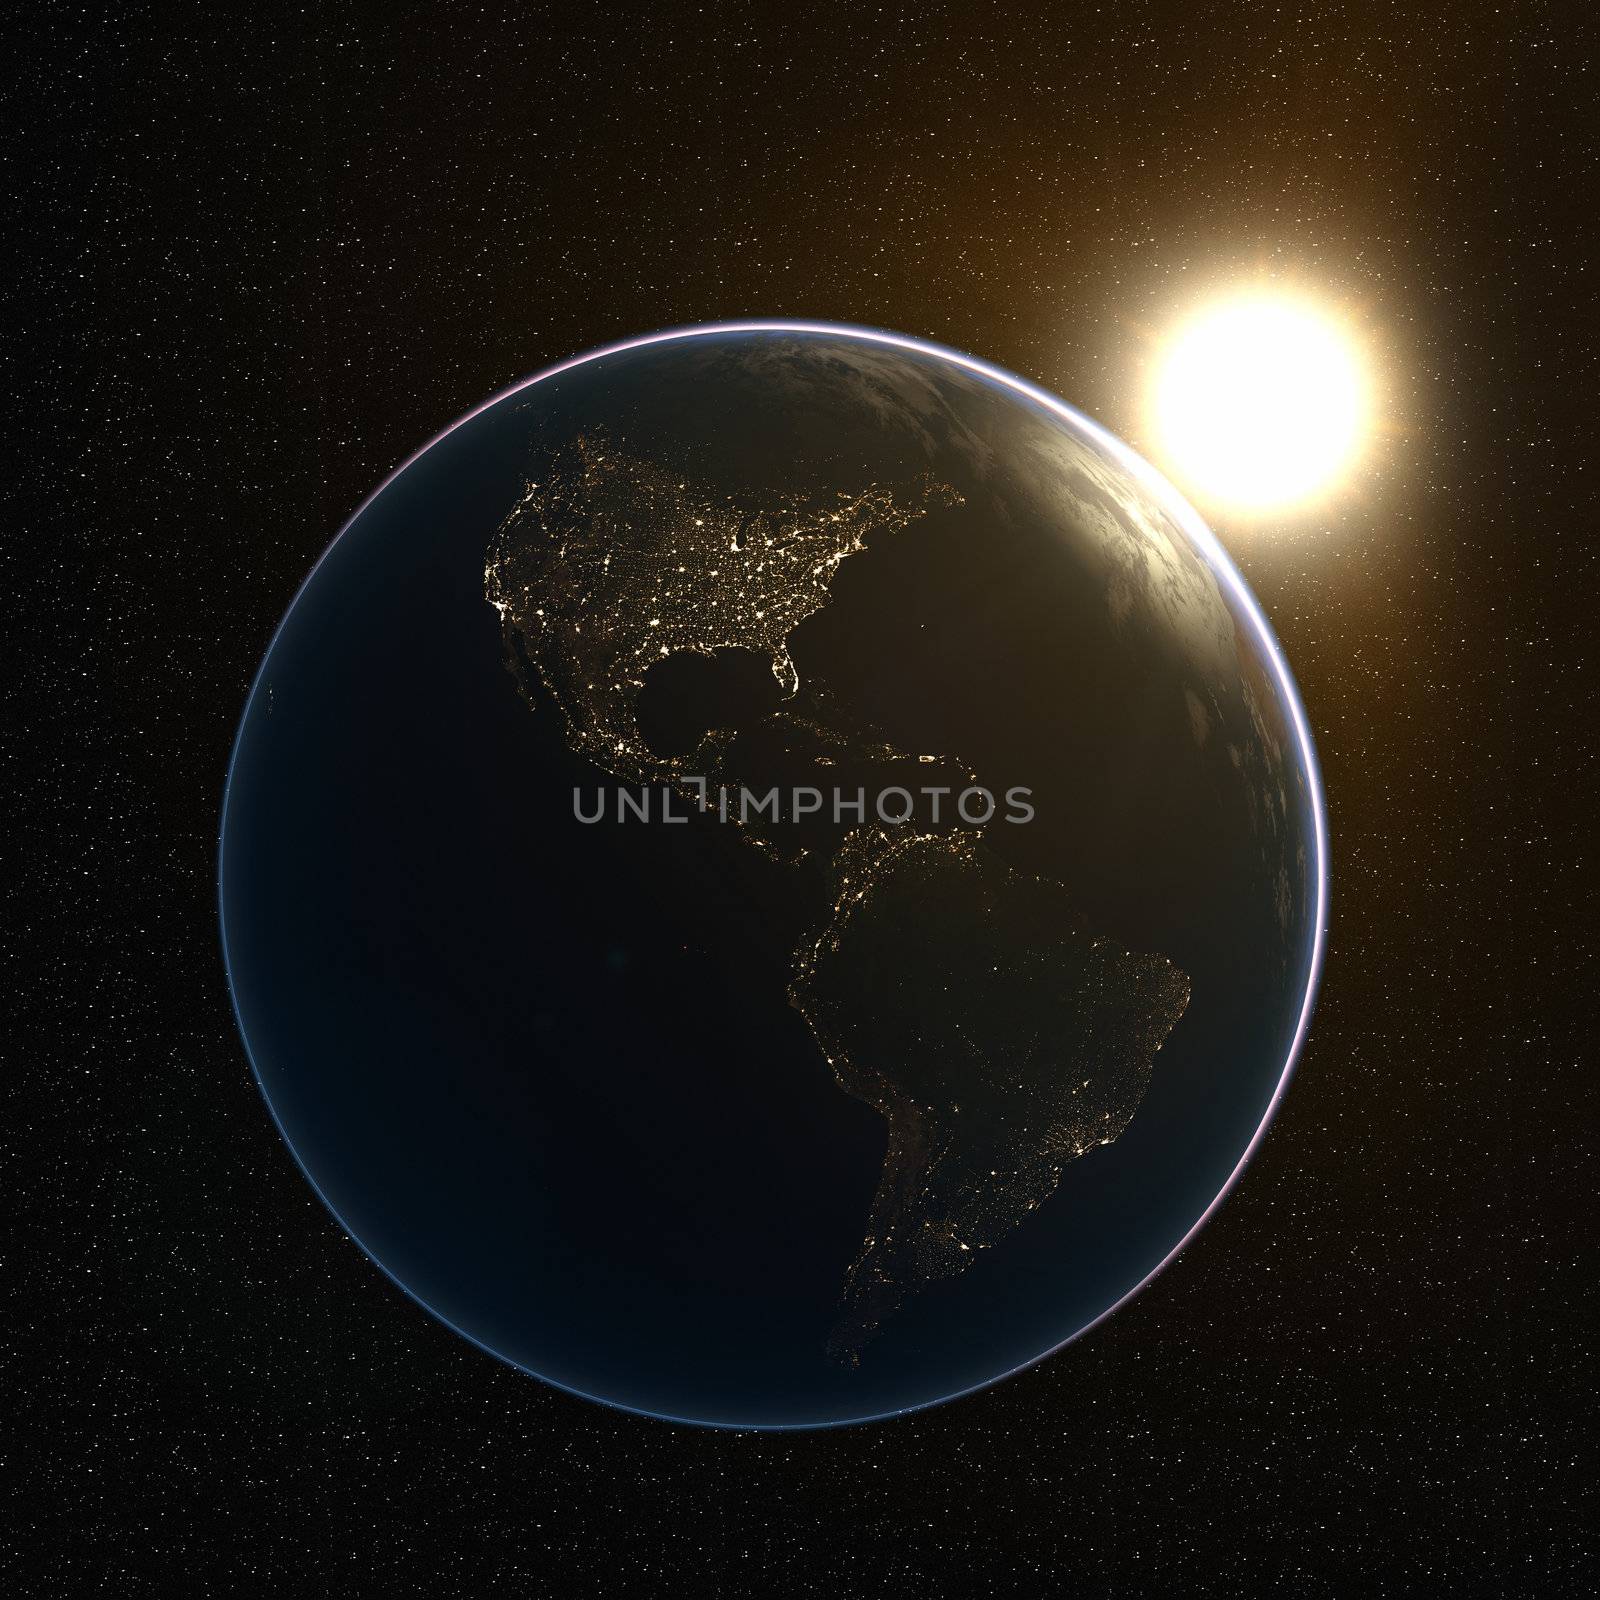 Dark side of earth, only lit by the bright city lights of America. Earth maps courtesy of NASA: http://visibleearth.nasa.gov/